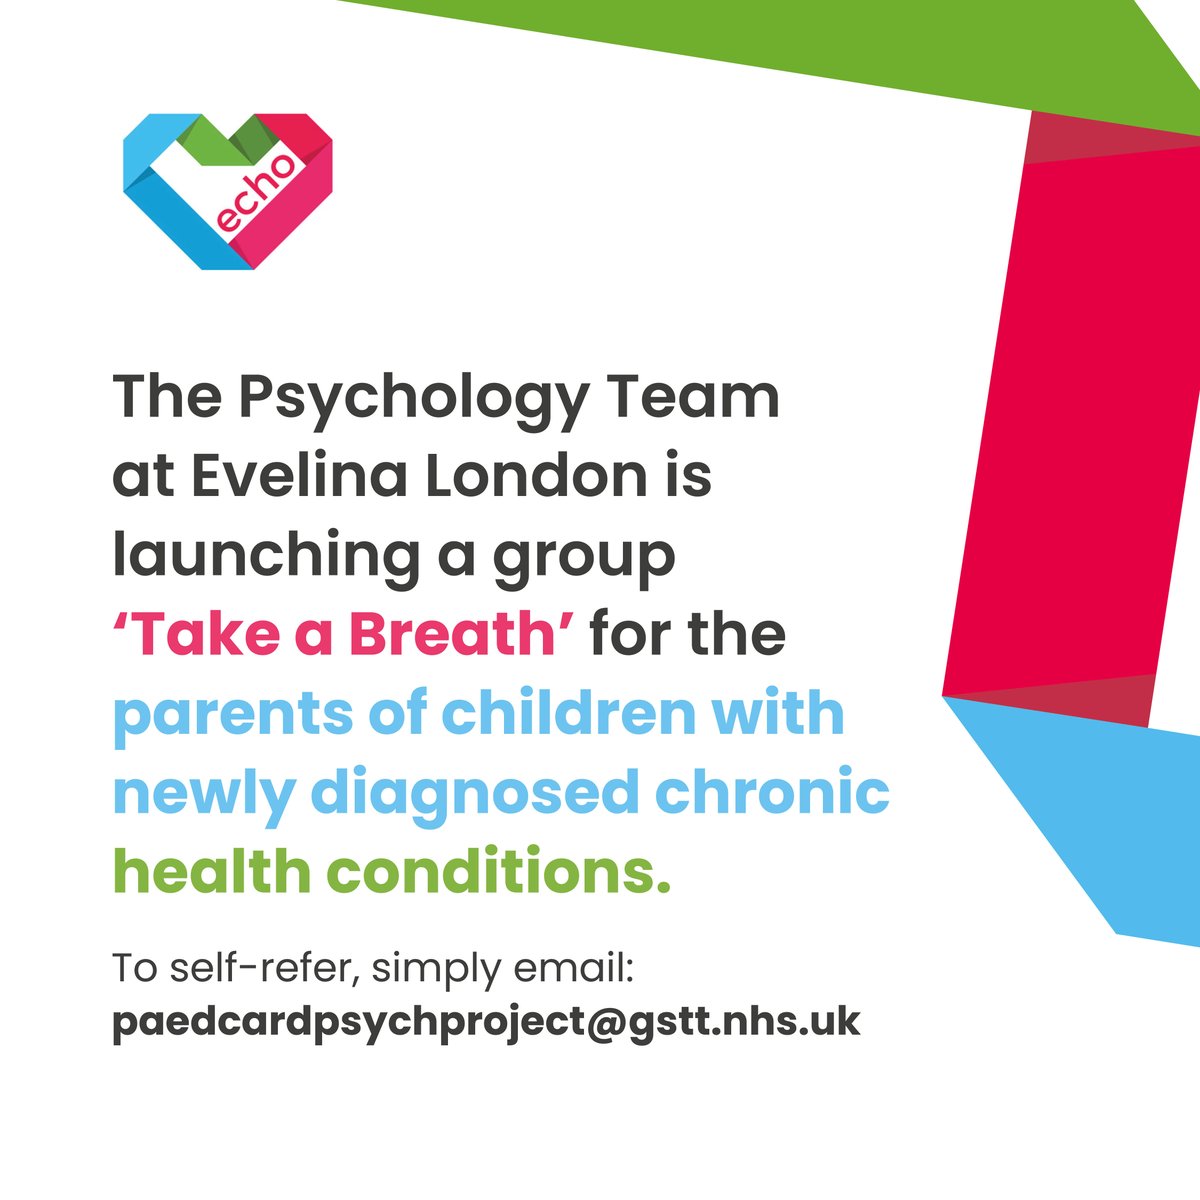 🌟 Exciting news! The Psychology Team at Evelina London is launching a Take a Breath group specially crafted for parents of children with newly diagnosed cardiac conditions. 💖 Starting the first round of sessions w/c 8th April, email paedcardpsychproject@gstt.nhs.uk to refer.